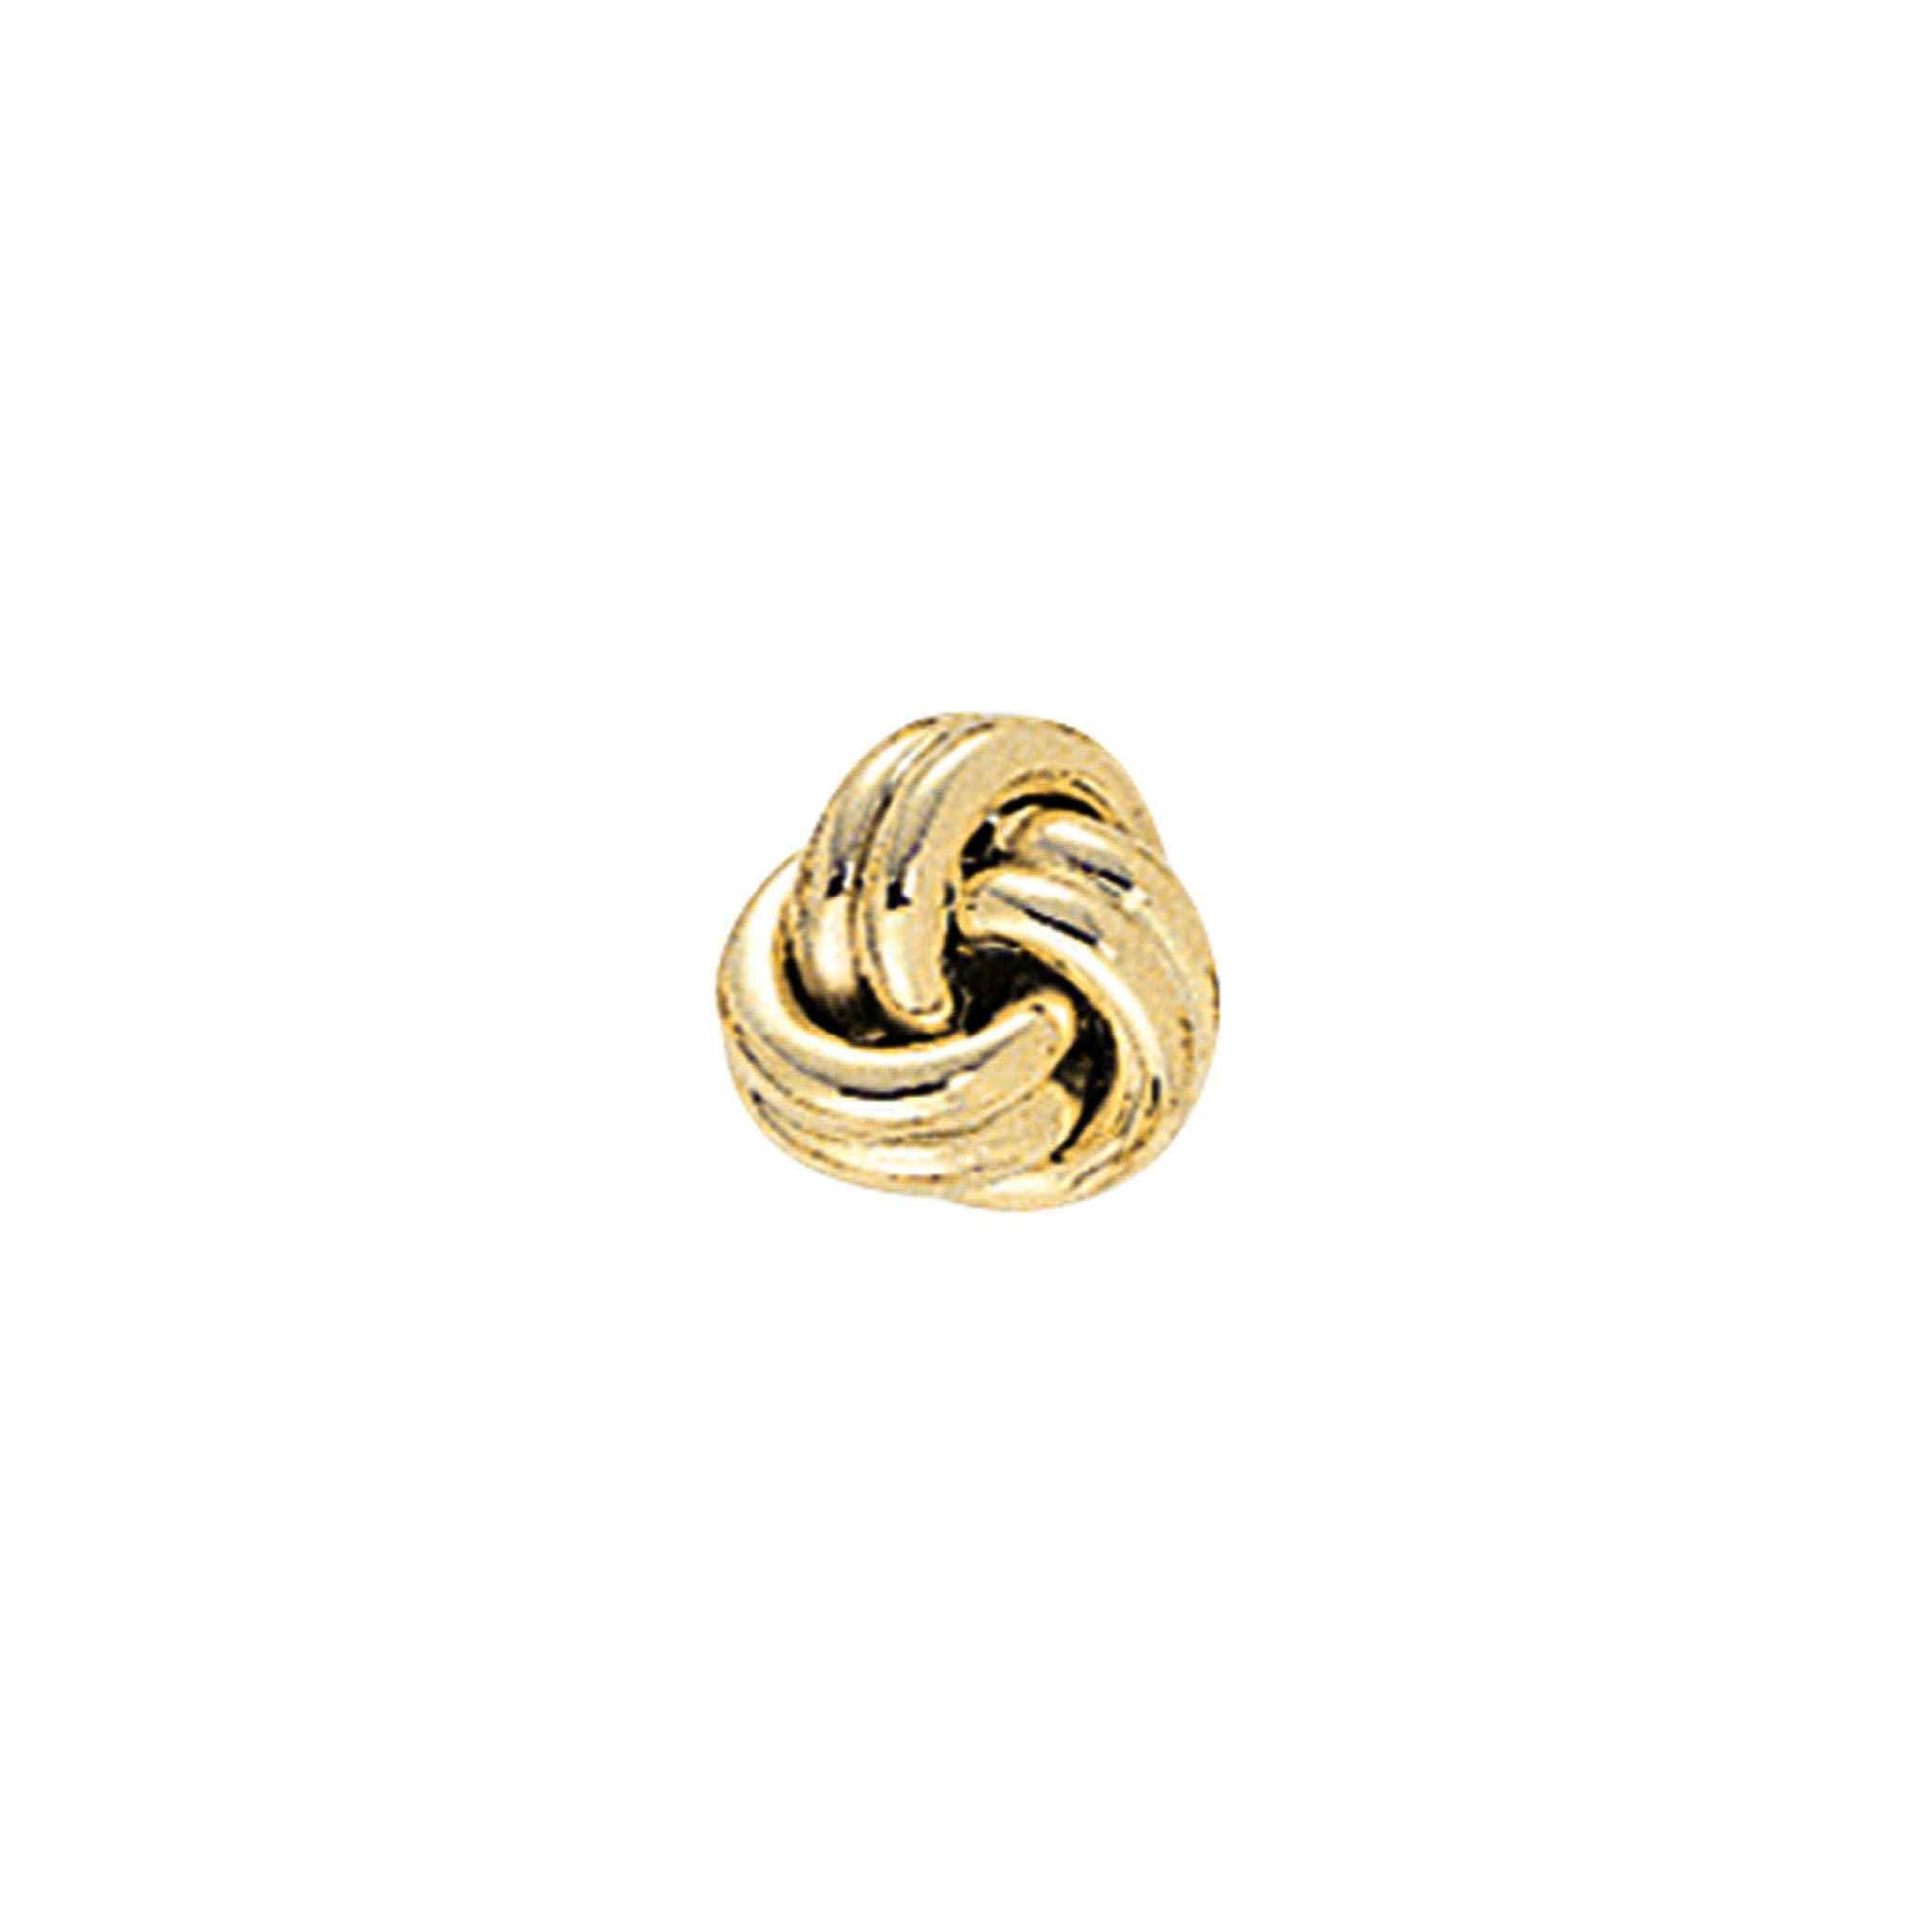 A 14k gold love knot tie tack displayed on a neutral white background.